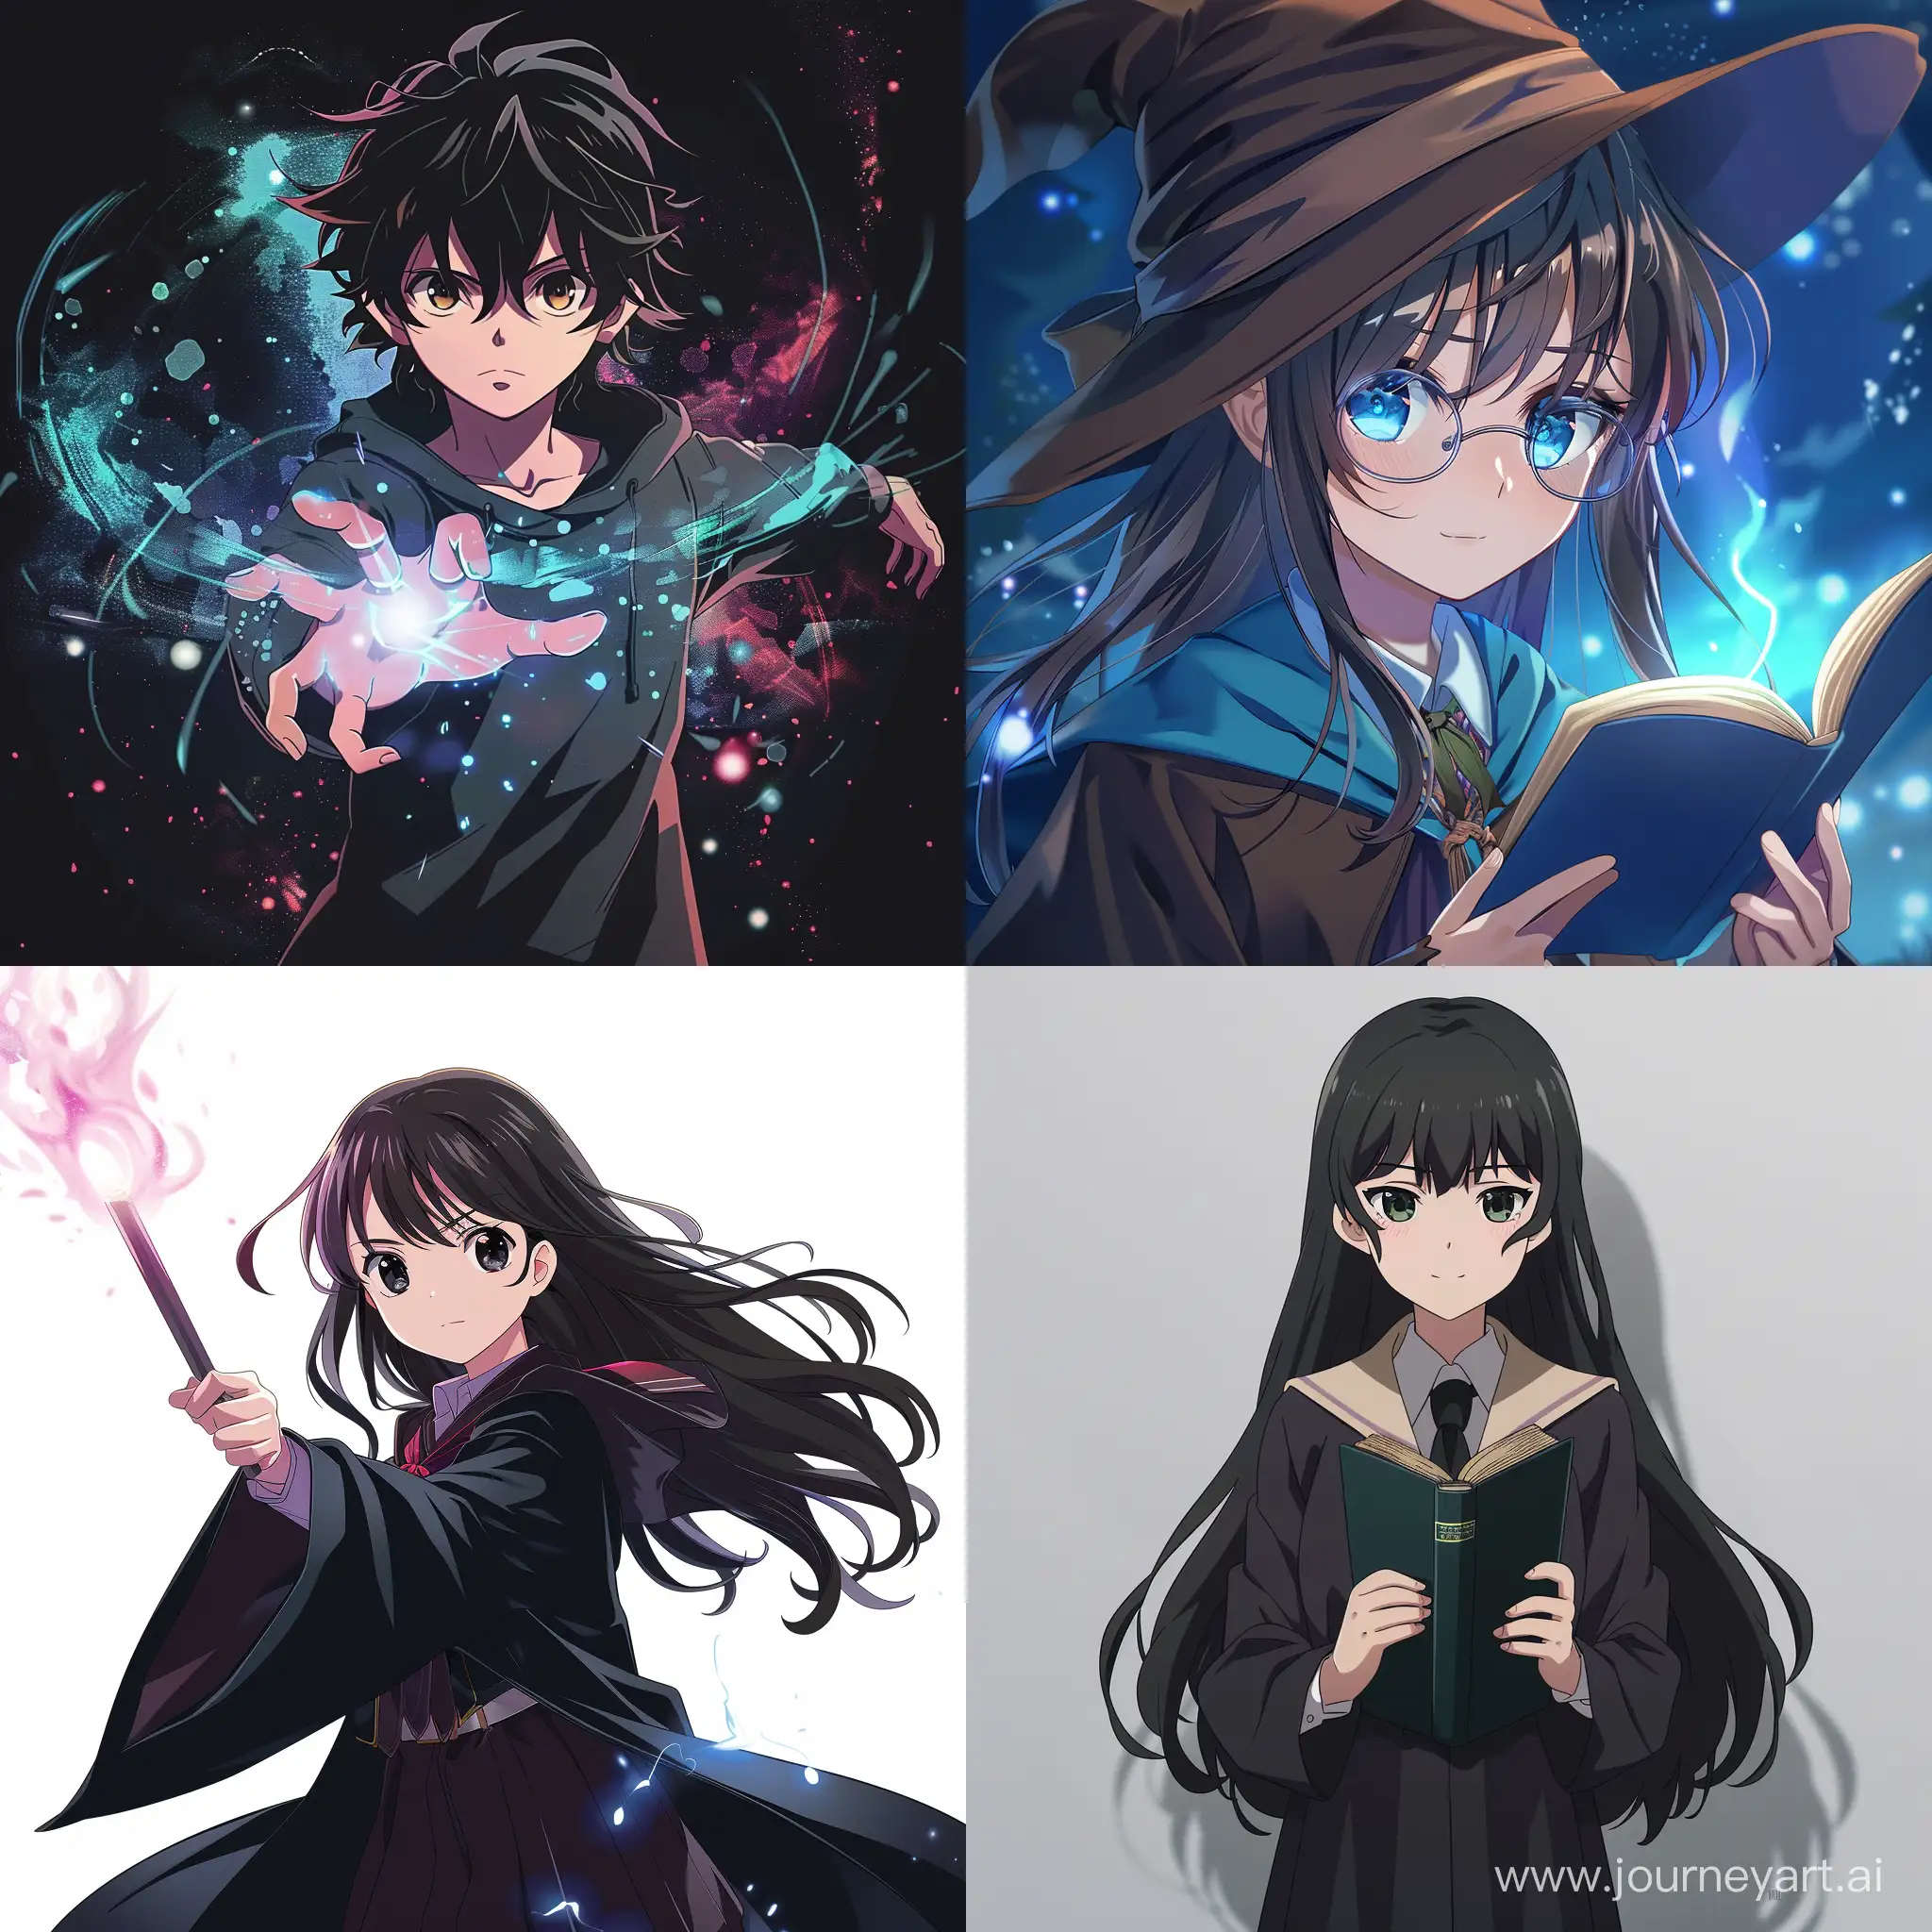 Magical-Abilities-Anime-Student-at-Academy